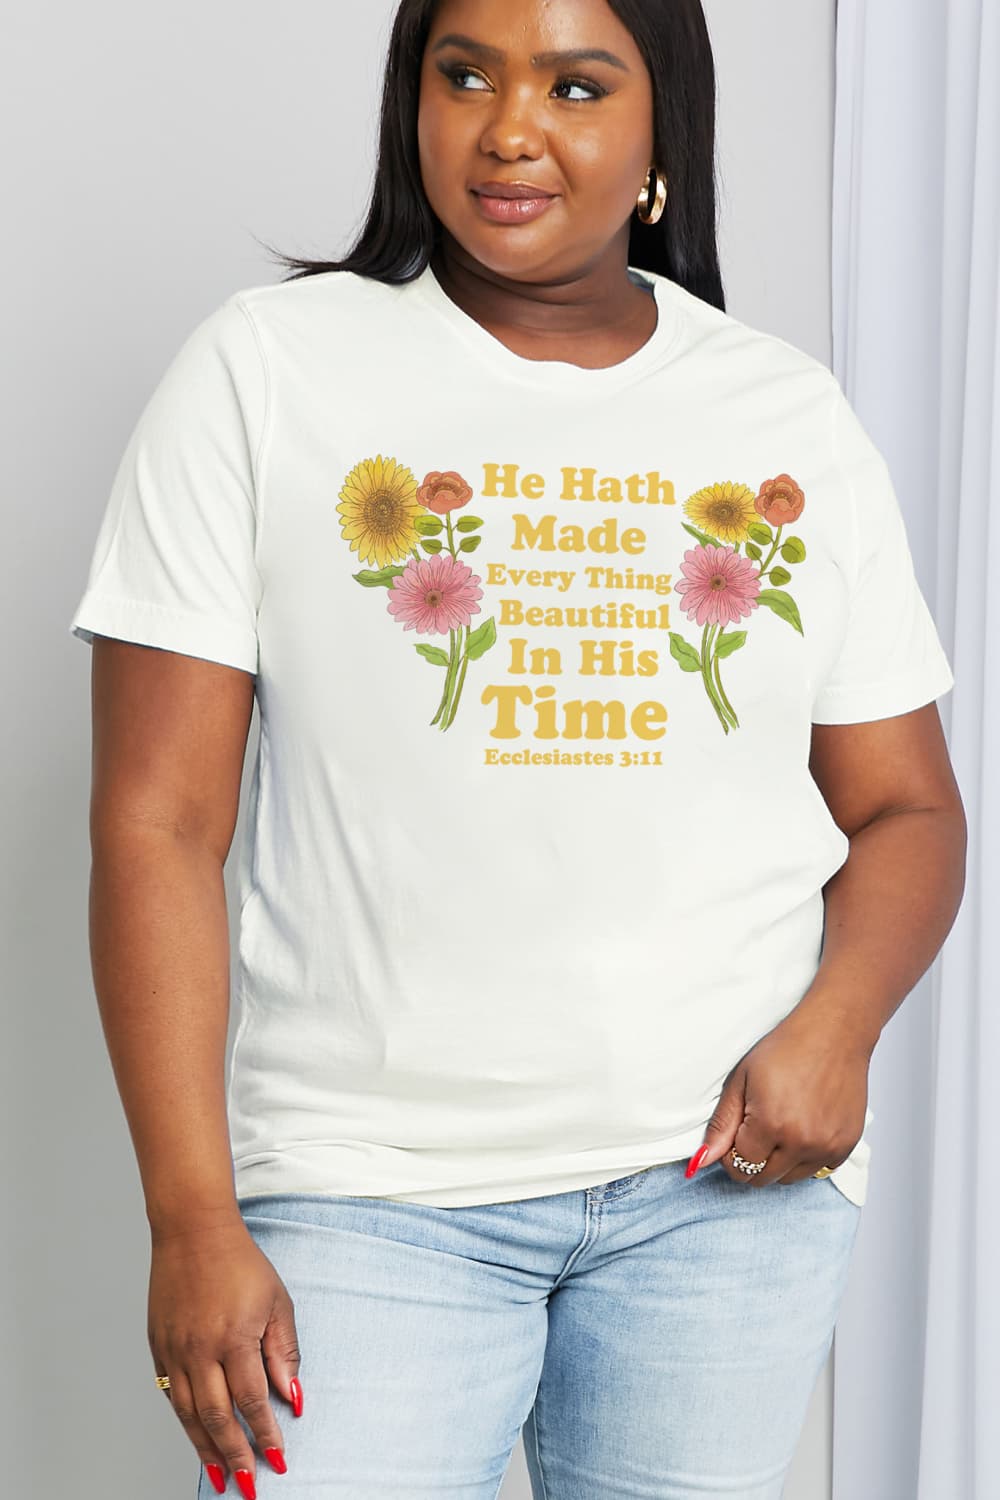 Women's Full Size He Hath Made Everything Beautiful in His Time Ecclesiastes 3:11 Graphic Cotton Tee